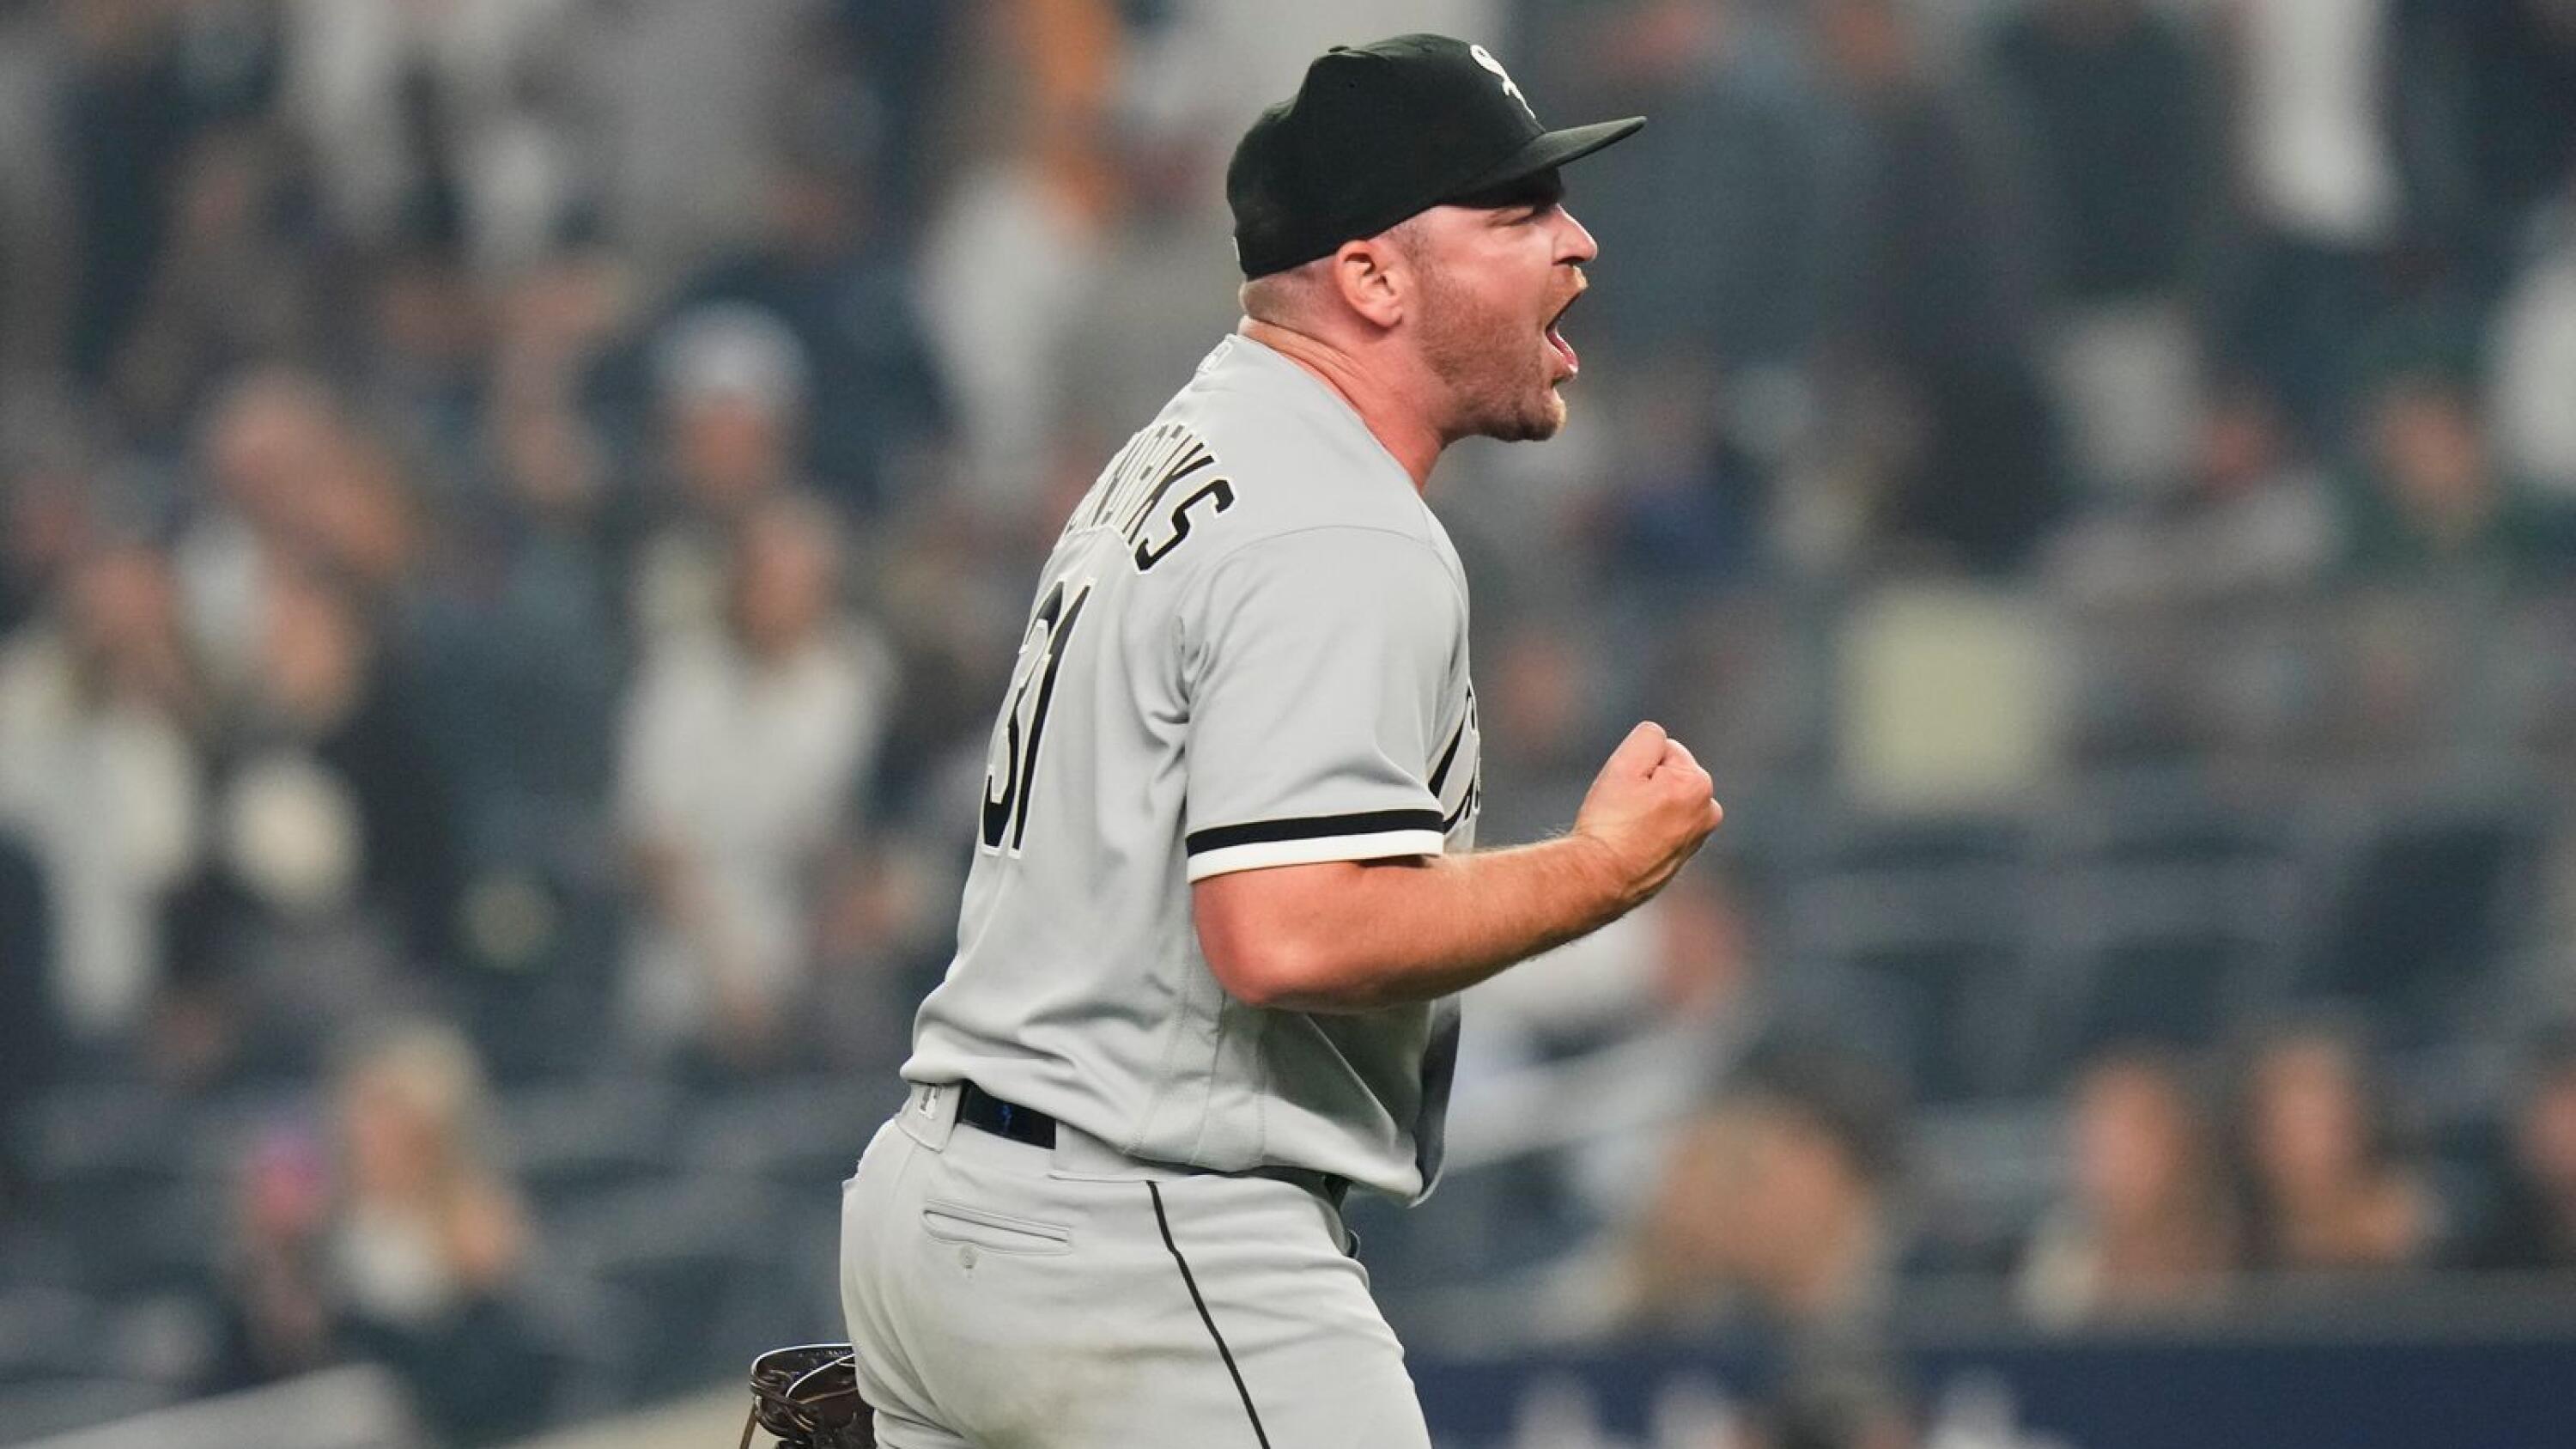 Pirates Slip by Yankees 3-2 To Avoid Series Sweep